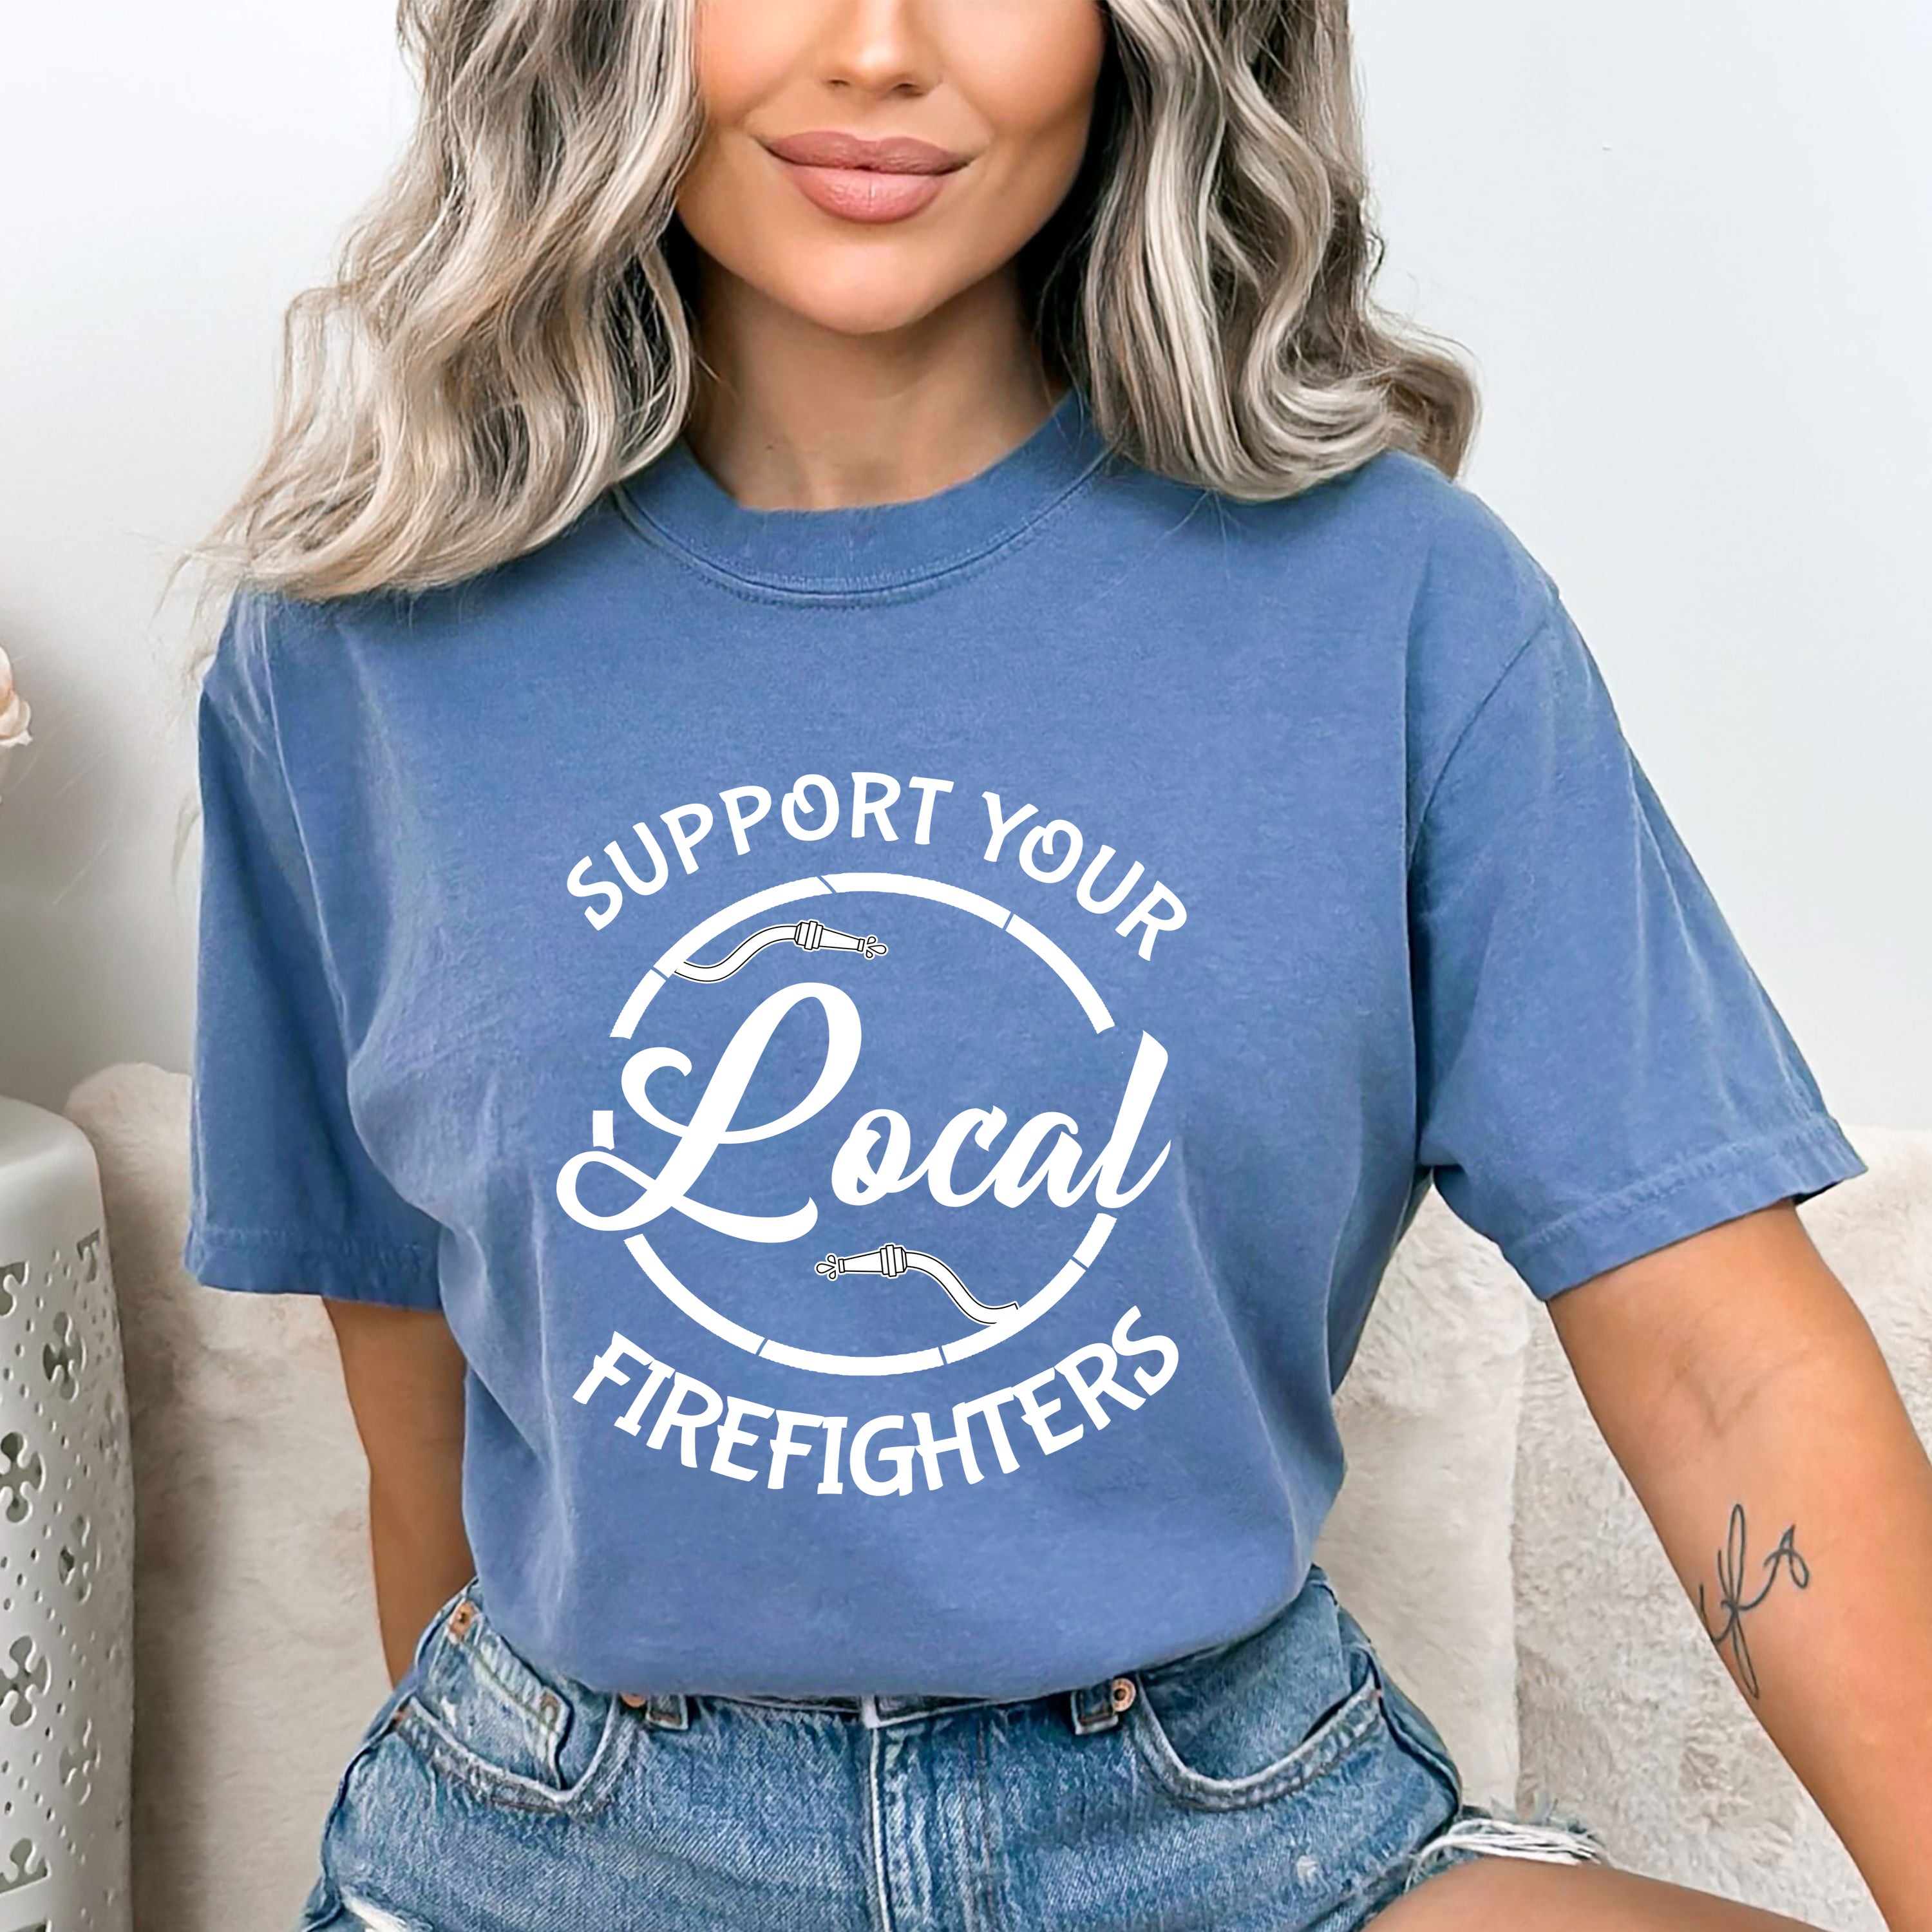 "support your fire fighter"